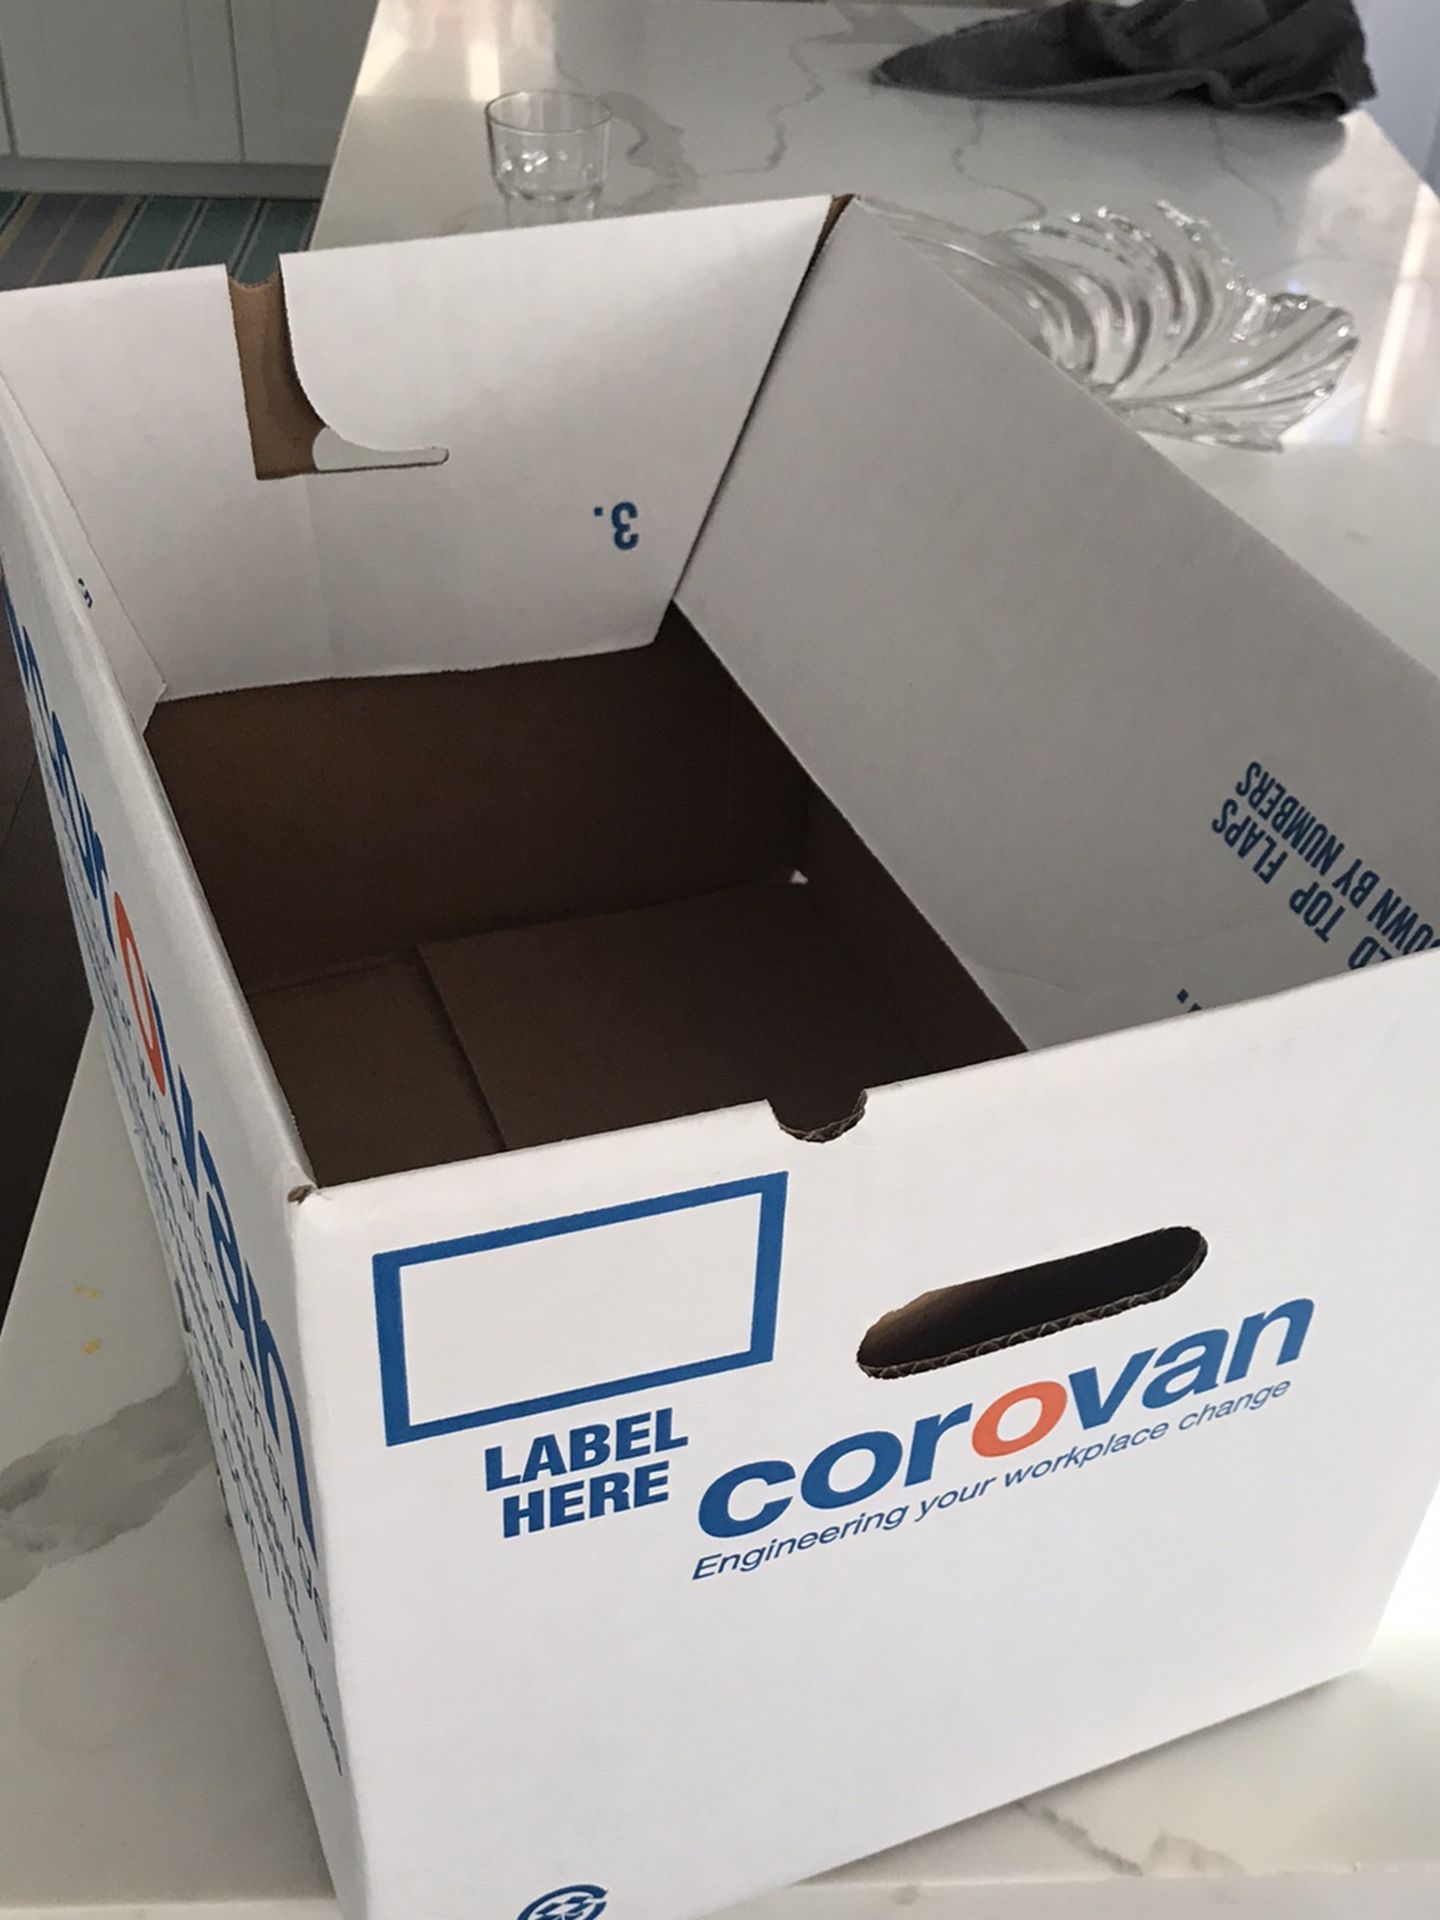 Free Moving Boxes To Give Away